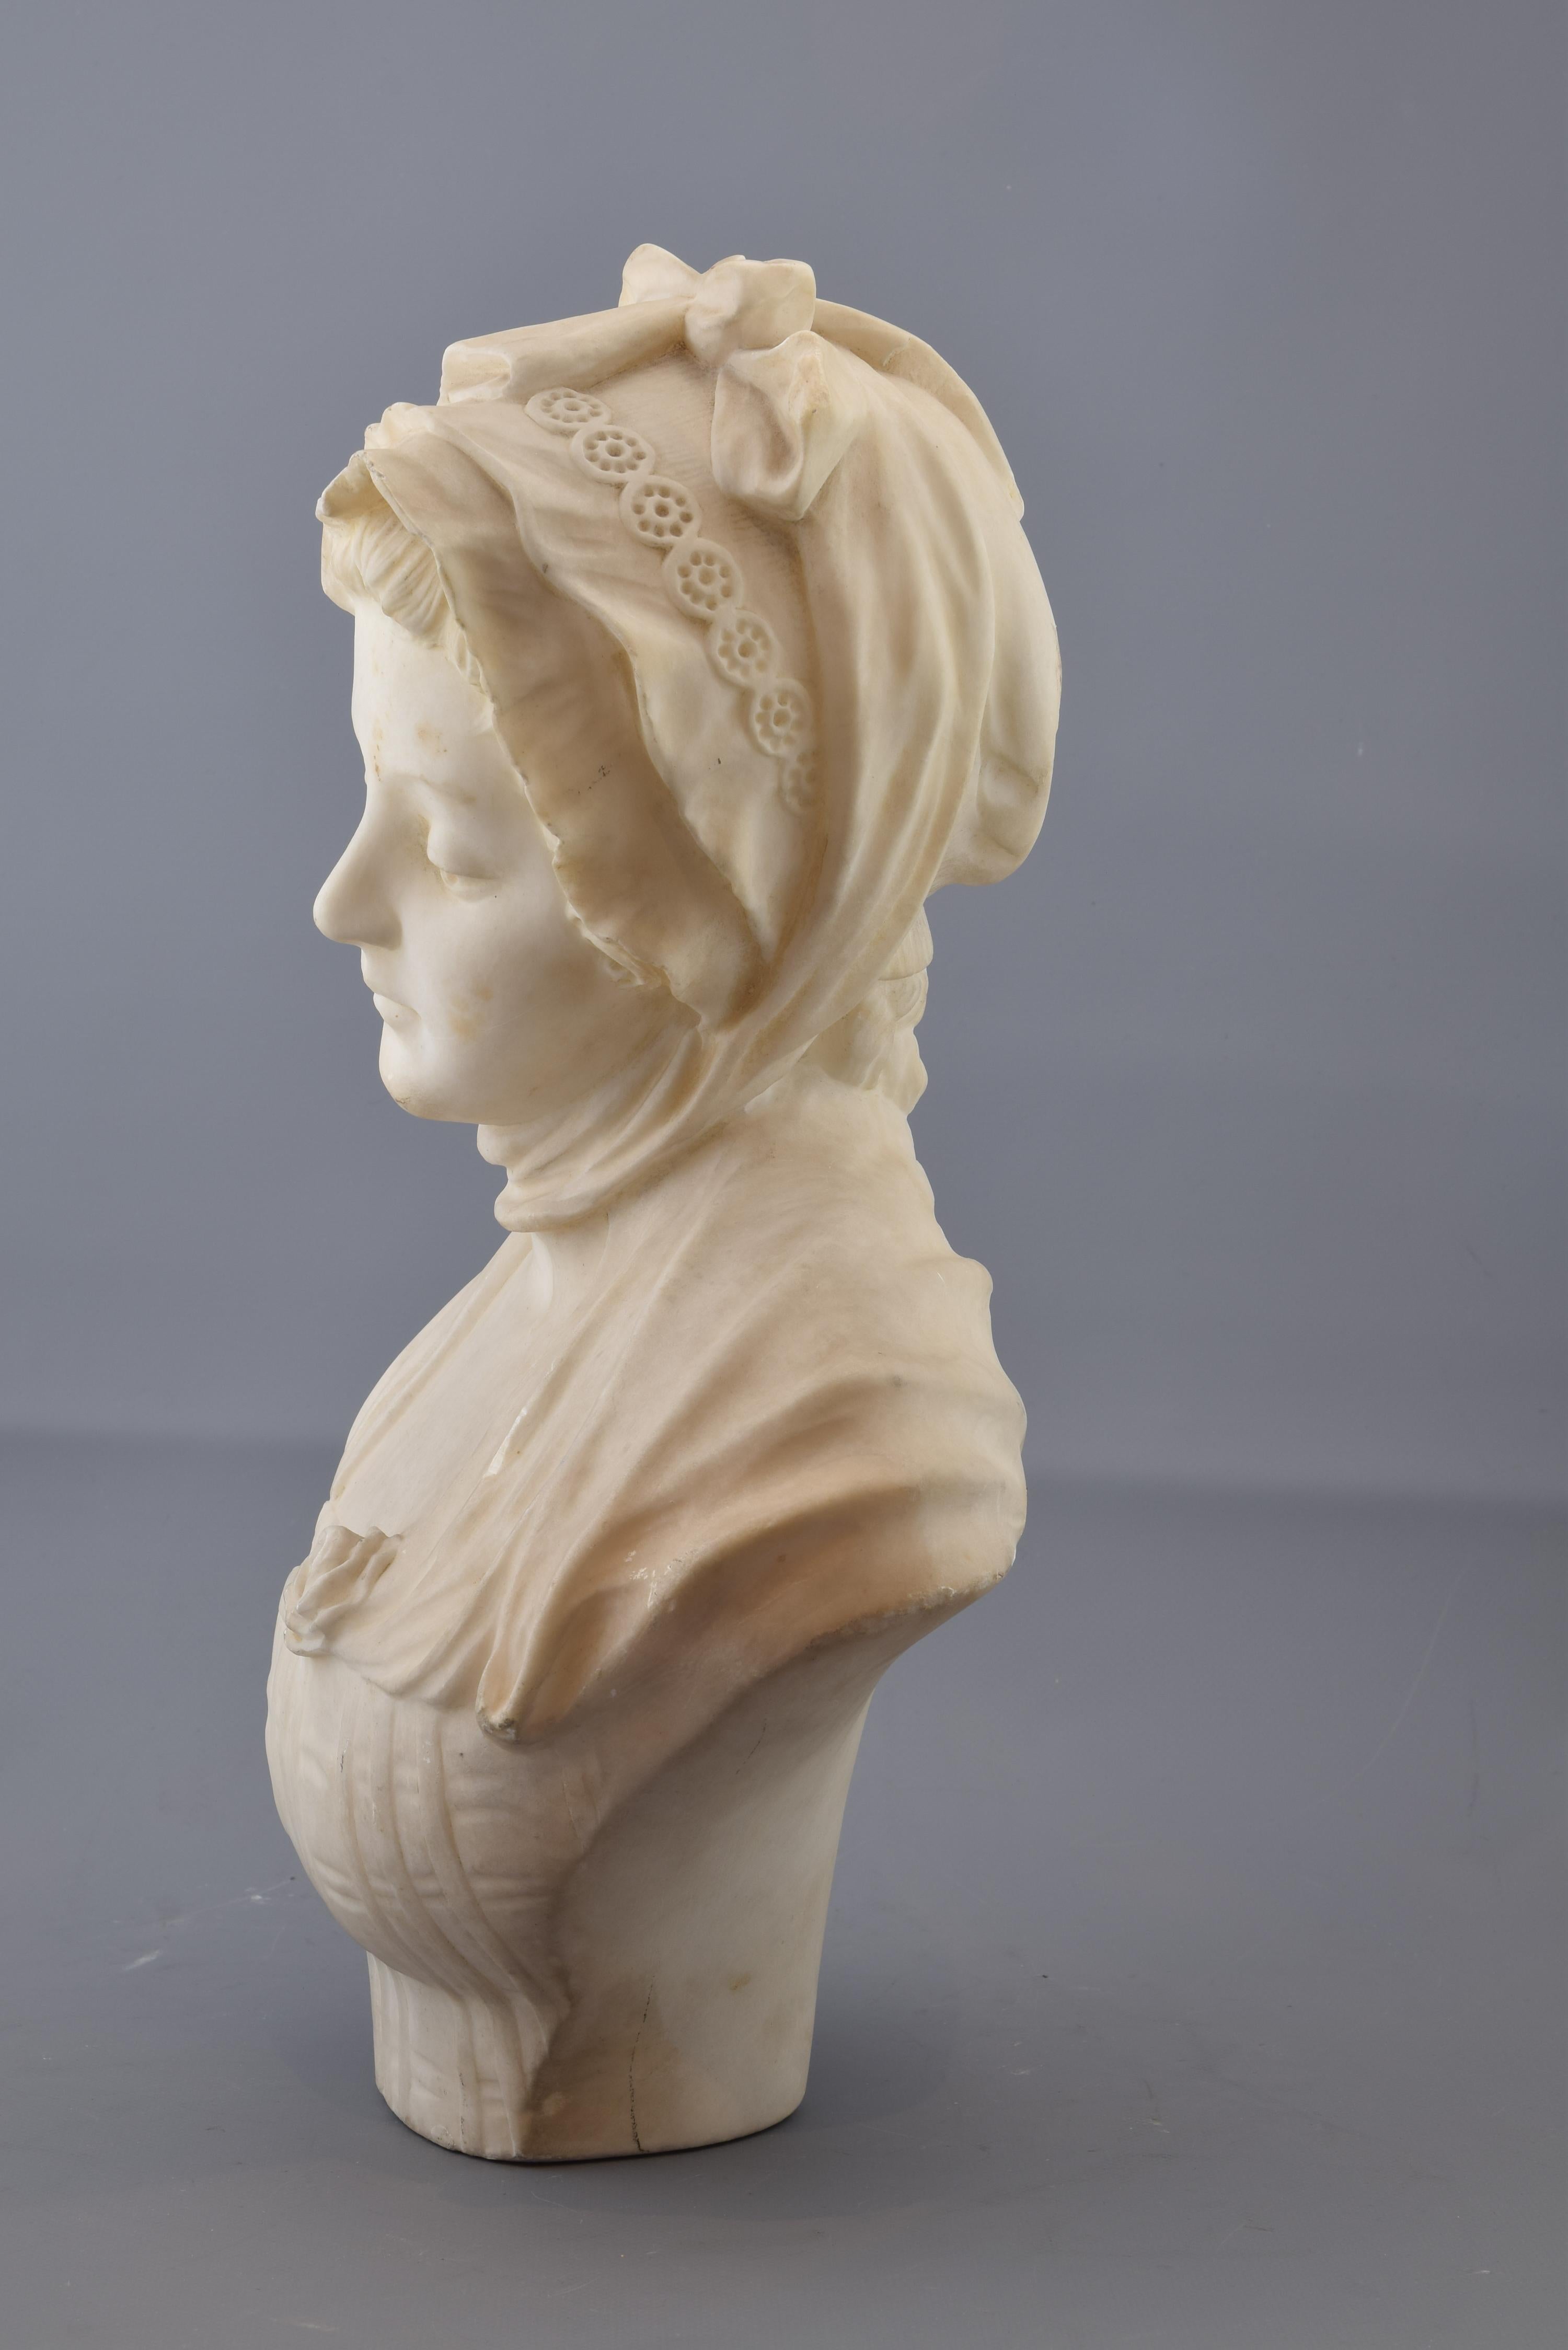 Bust of lady carved in white marble that shows the young woman with the look down, without interacting with the viewer, and dressed in an outfit that recalls in some details the fashion of the eighteenth century. The attitude of the young woman and